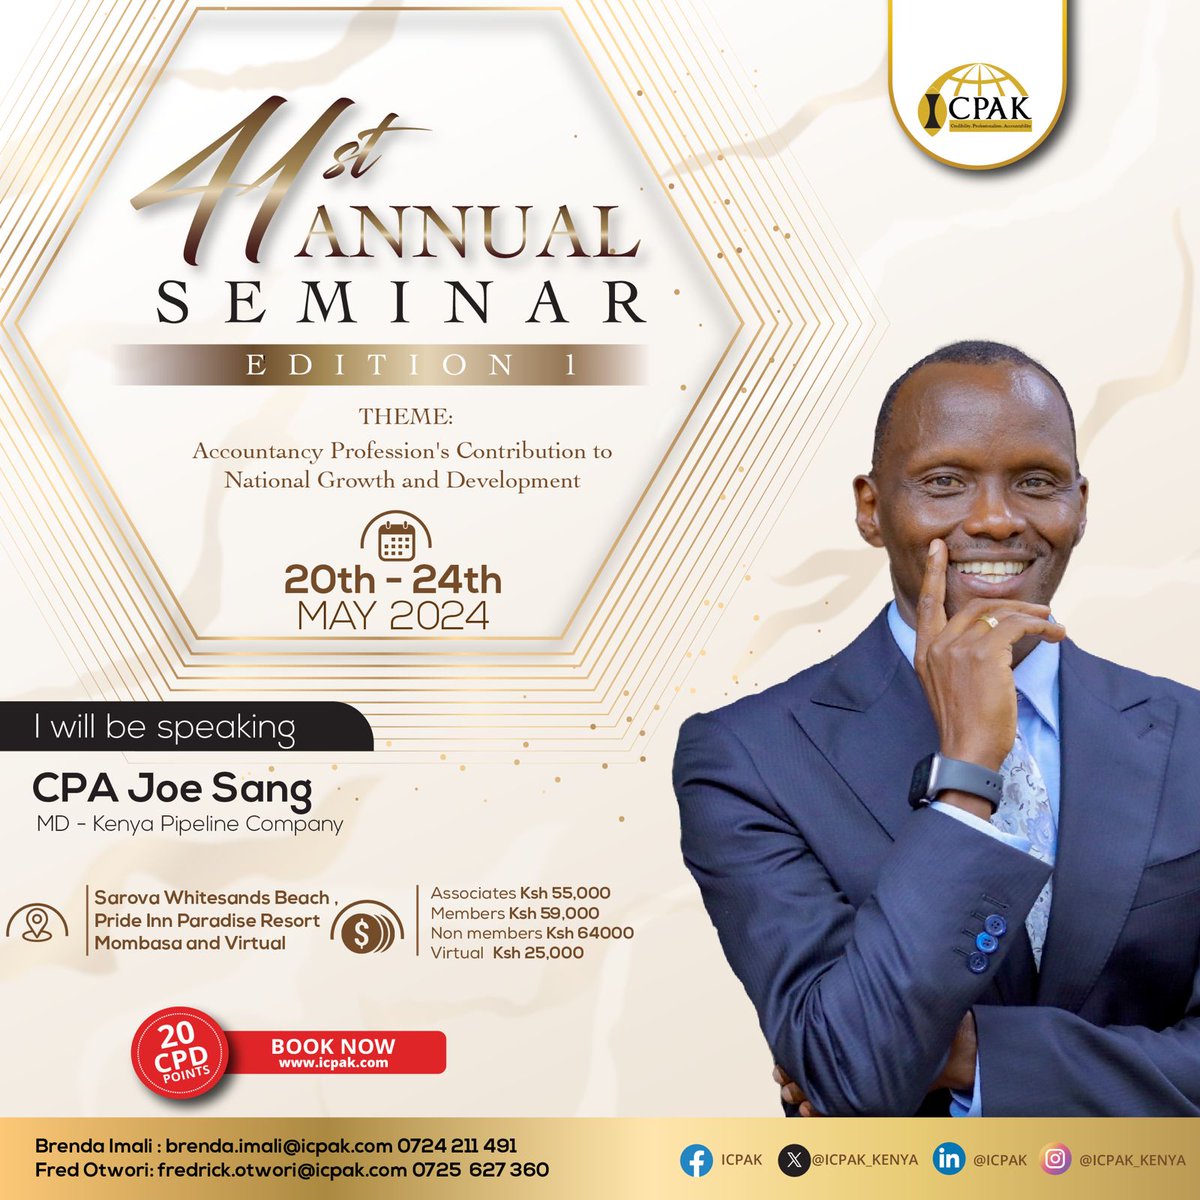 Delve into the complexities of fuel pricing and supply in Kenya at the #ICPAK41stAnnualSem Edition 1. Reserve your spot today and engage in this enlightening conversation. Secure your seat now: Physical: shorturl.at/eCJQV Virtual: shorturl.at/bkly2 @kenyapipeline ^CA